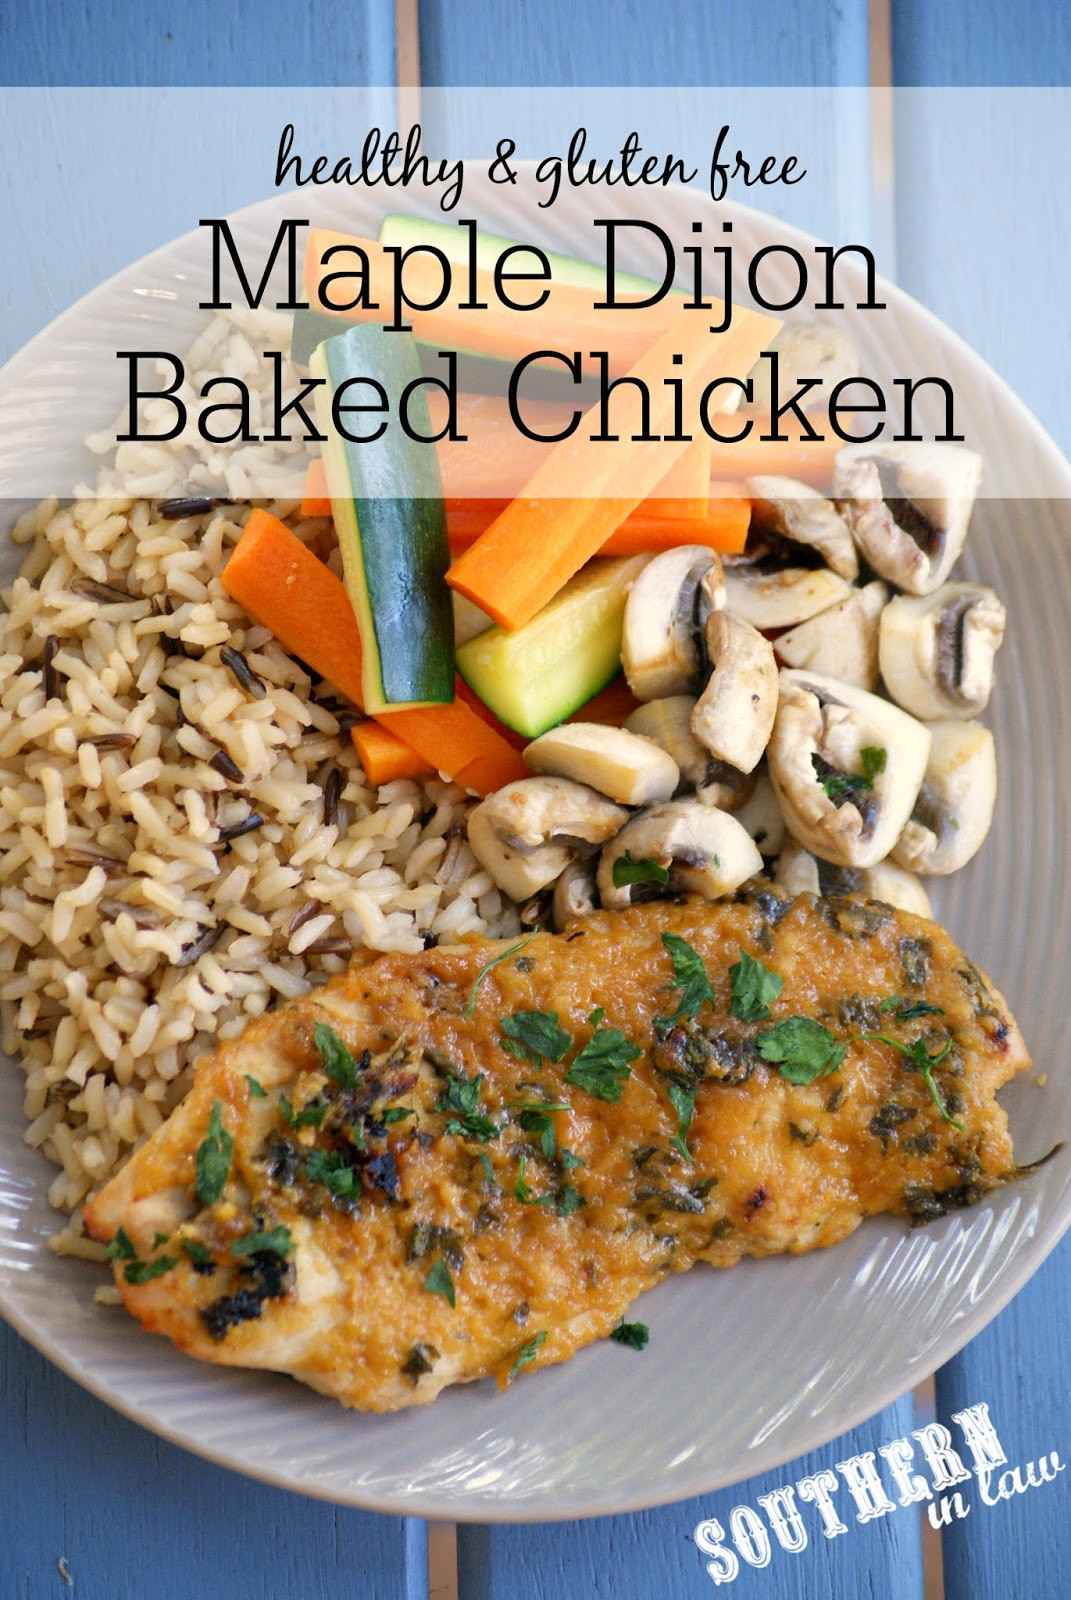 Low Calorie Baked Chicken Recipes
 Southern In Law Recipe Healthy Maple Dijon Baked Chicken